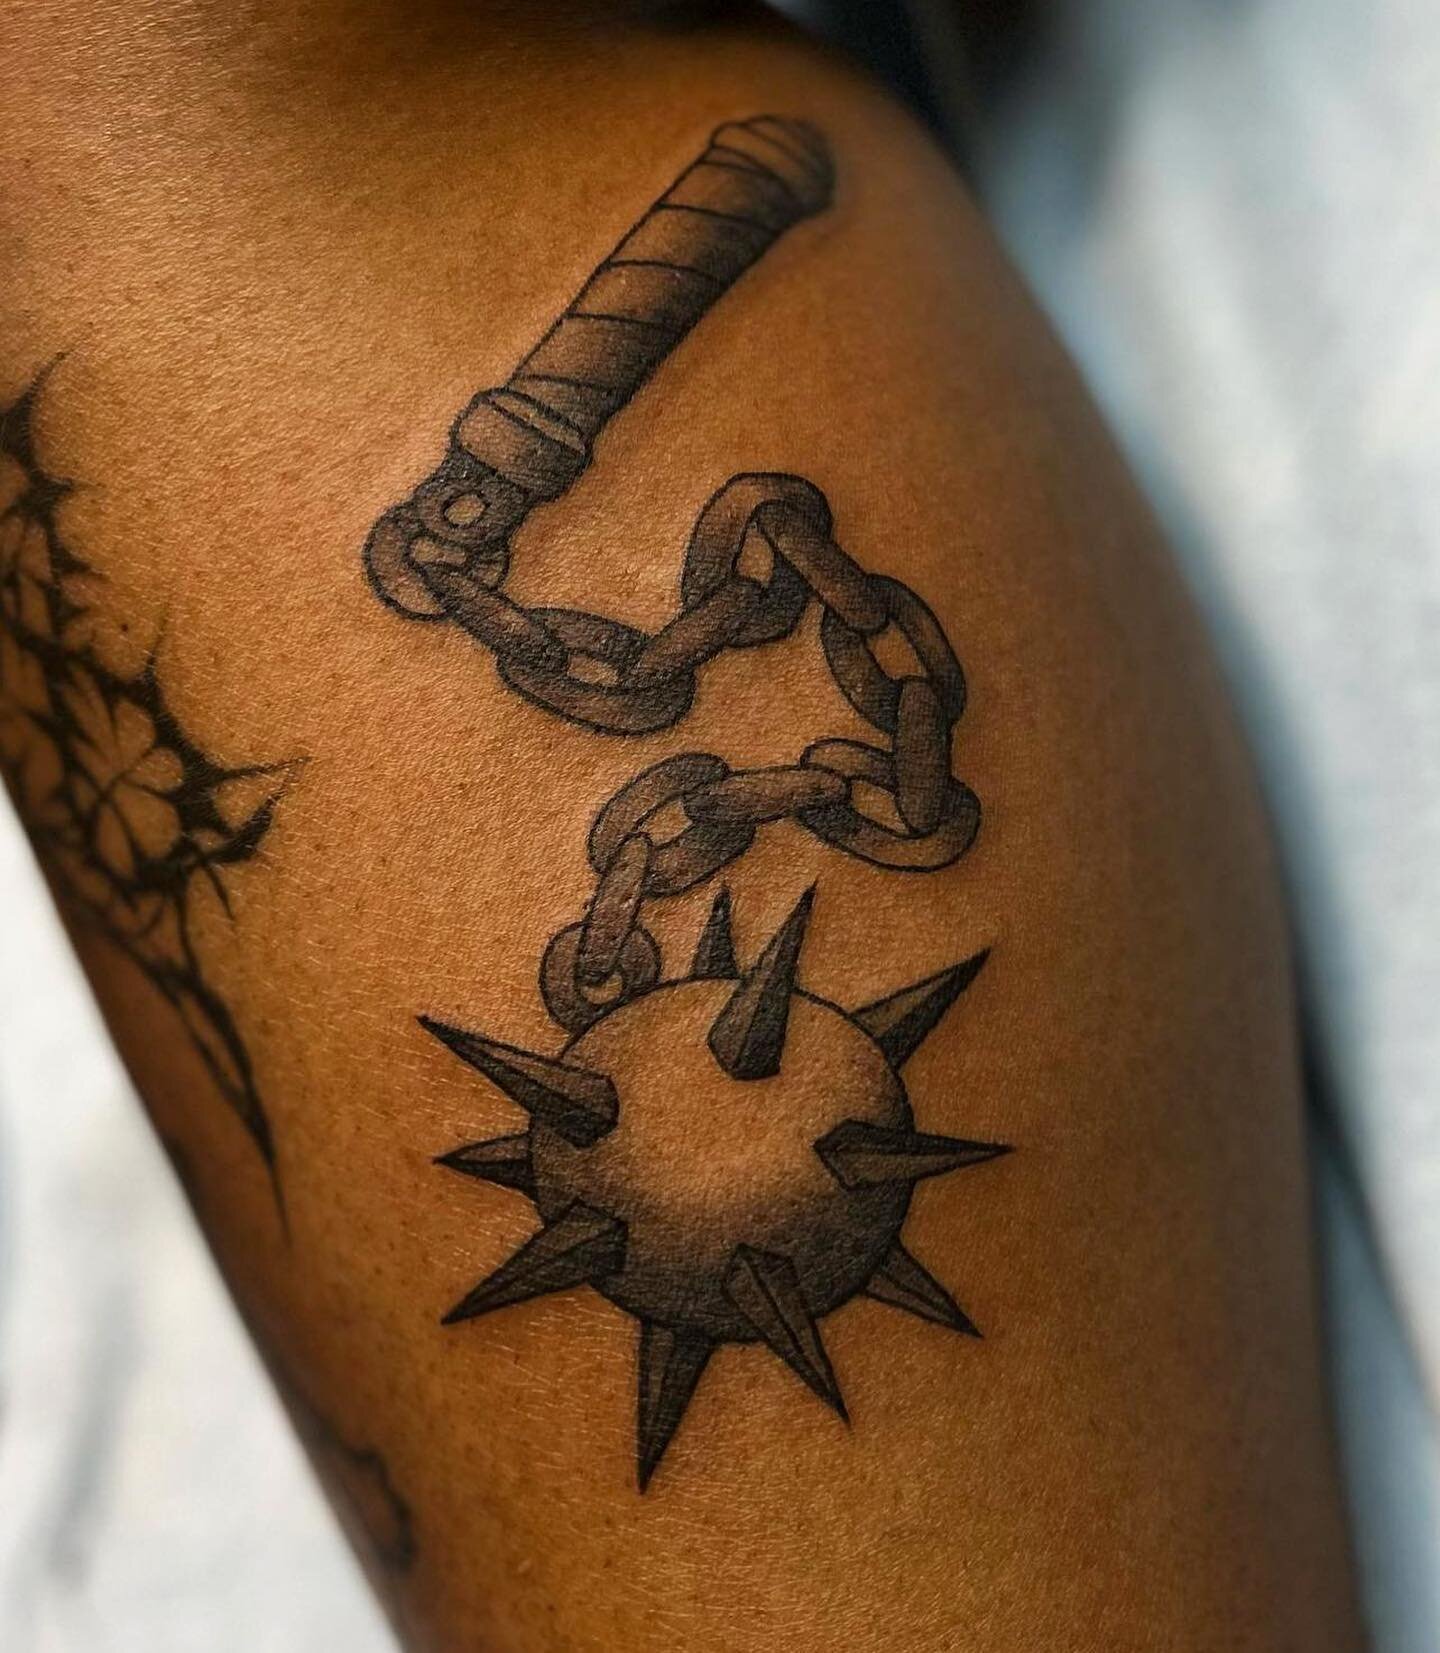 Fun mace tattoo by @ashleybucquoy ⛓️
She&rsquo;s taking appointments for next month. Go give her a follow, you won&rsquo;t regret it 👉@ashleybucquoy @ashleybucquoy @ashleybucquoy

Dark Atelier Tattoo
🏰1115 Front St. in Old Sac
☎️(916)573-3225
.
.
.